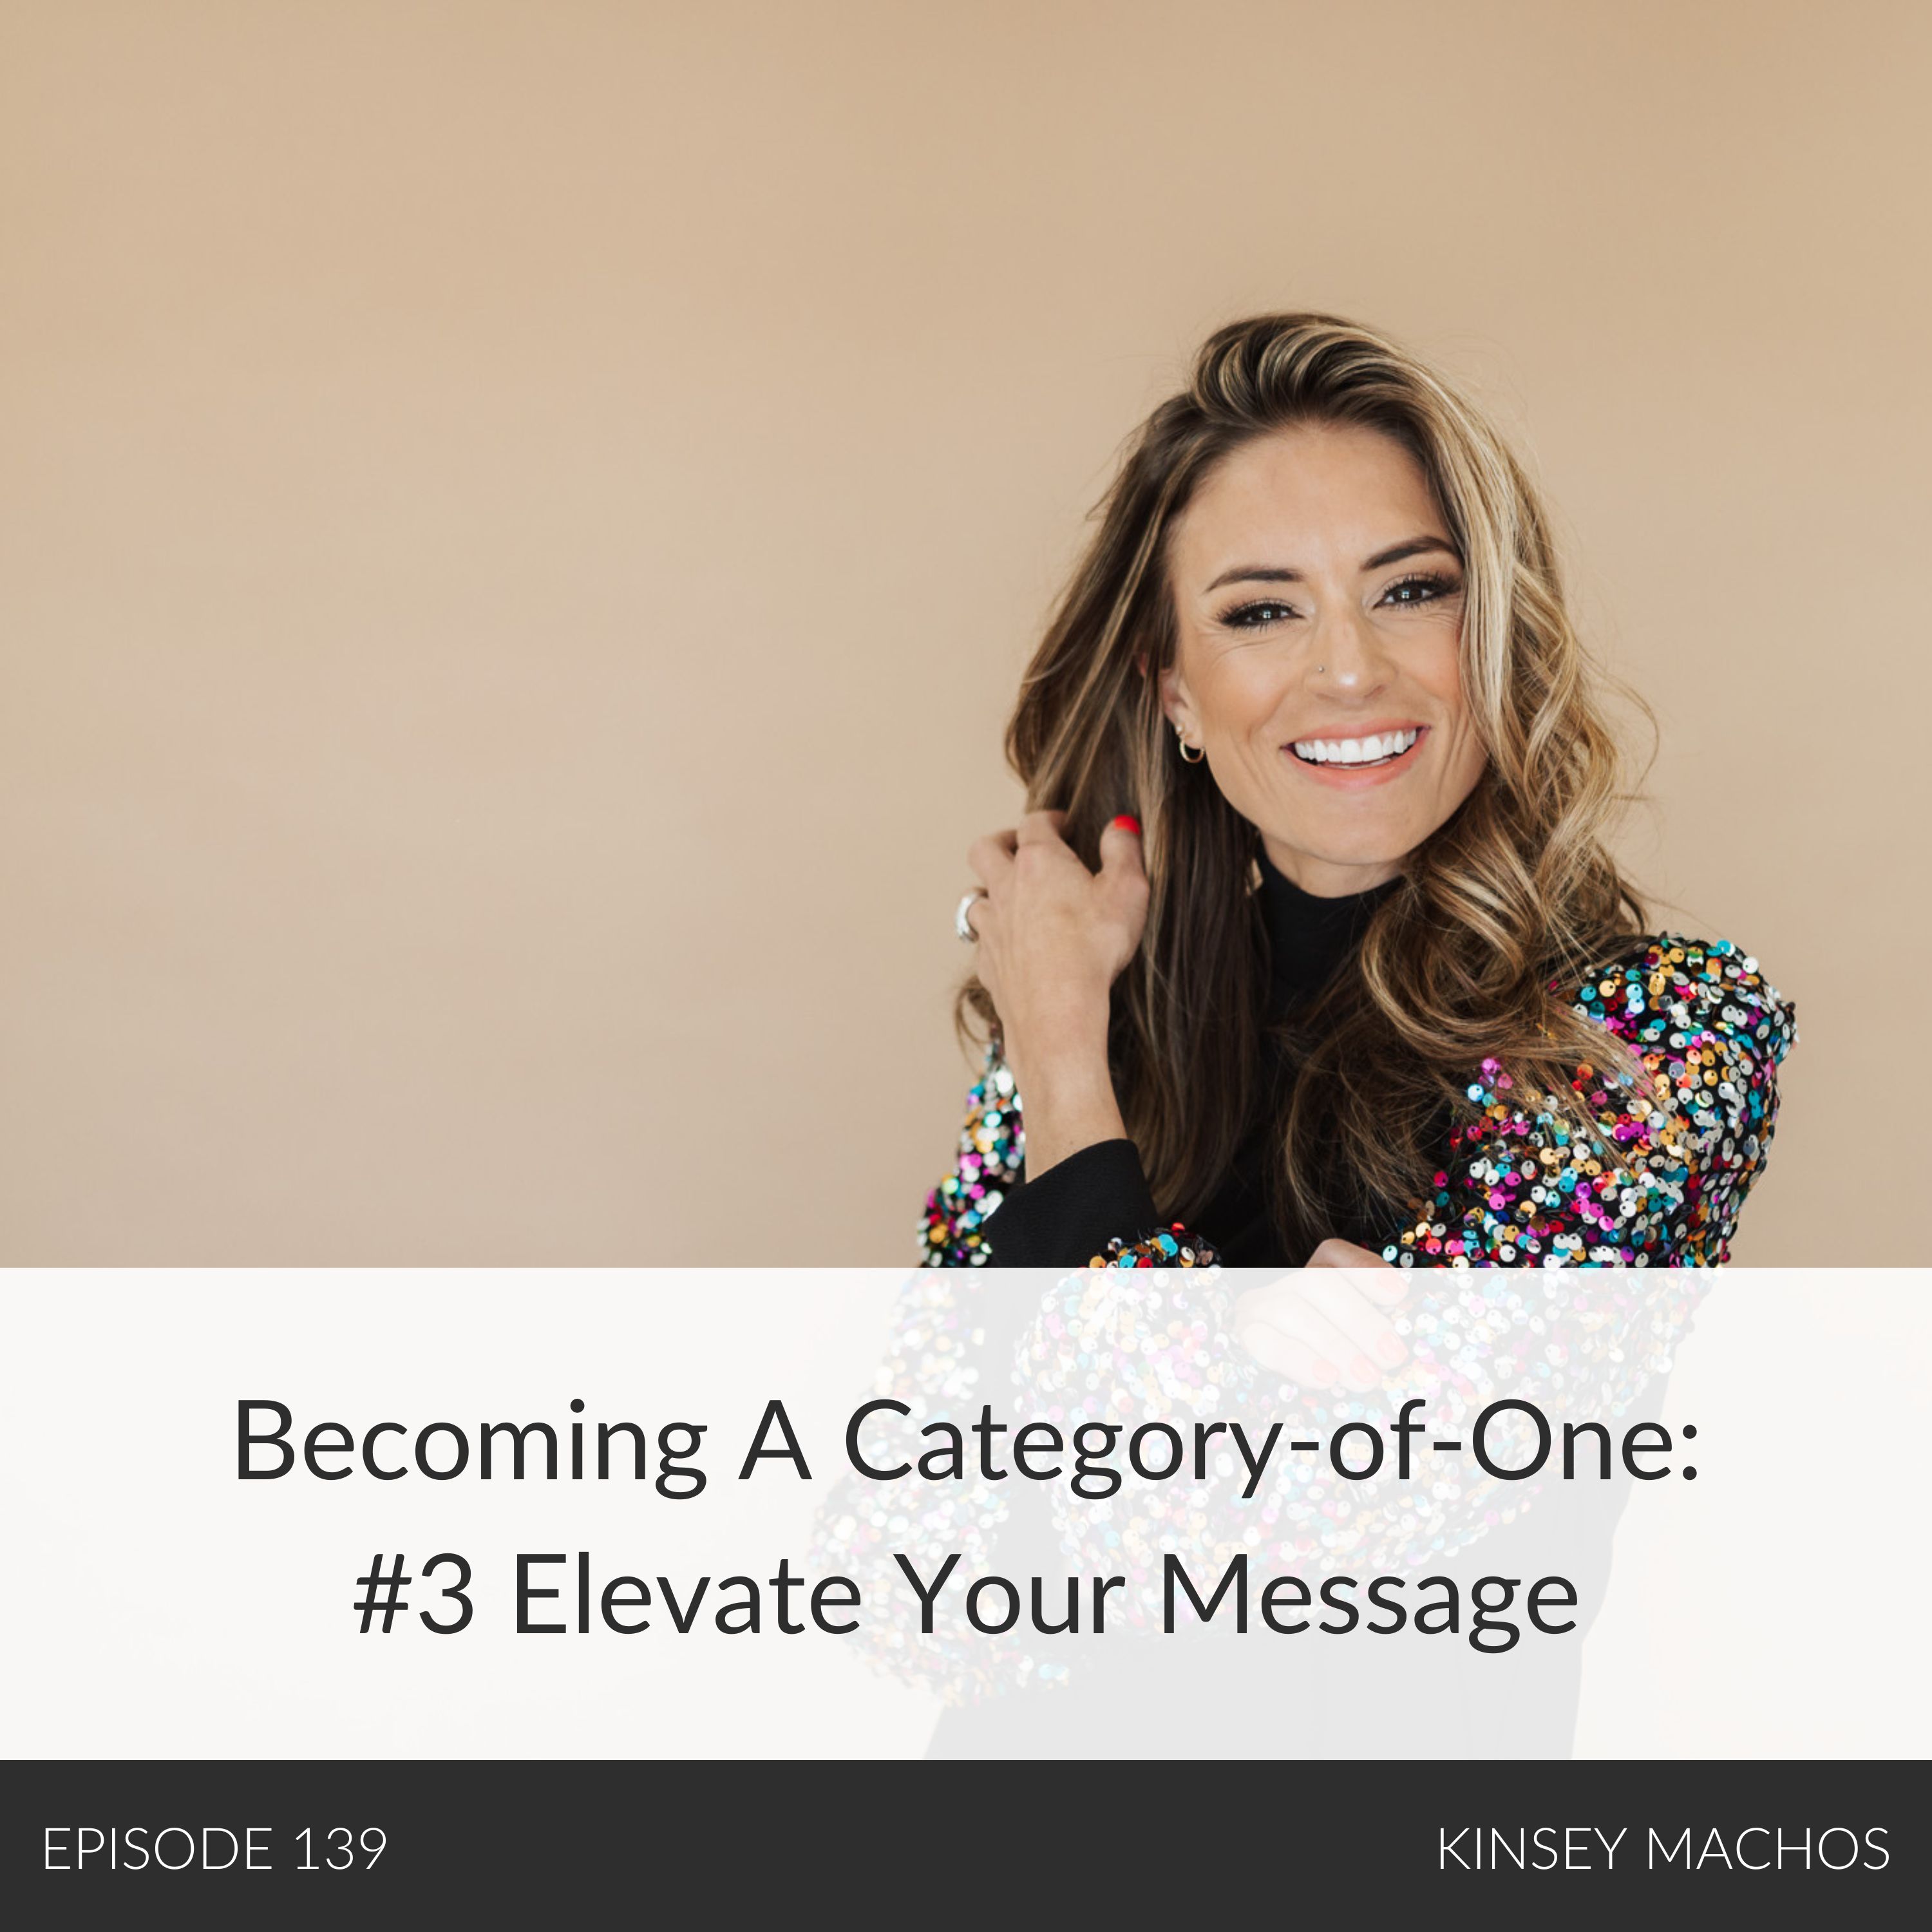 Becoming A Category-of-One: #3 Elevate Your Message